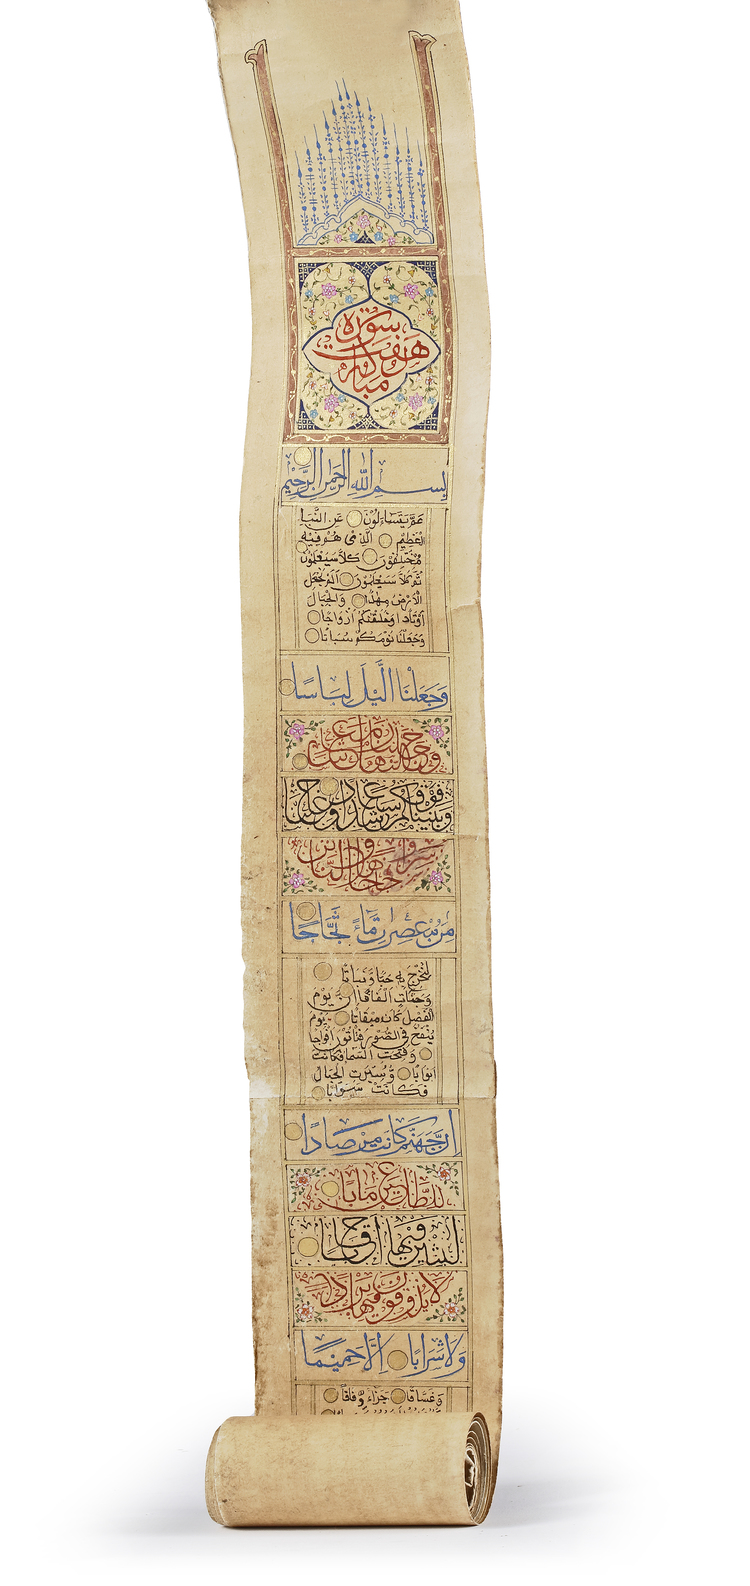 SEVEN CHAPTERS OF THE QURAN ON A PAPER ROLL, OTTOMAN, TURKEY, 19TH CENTURY